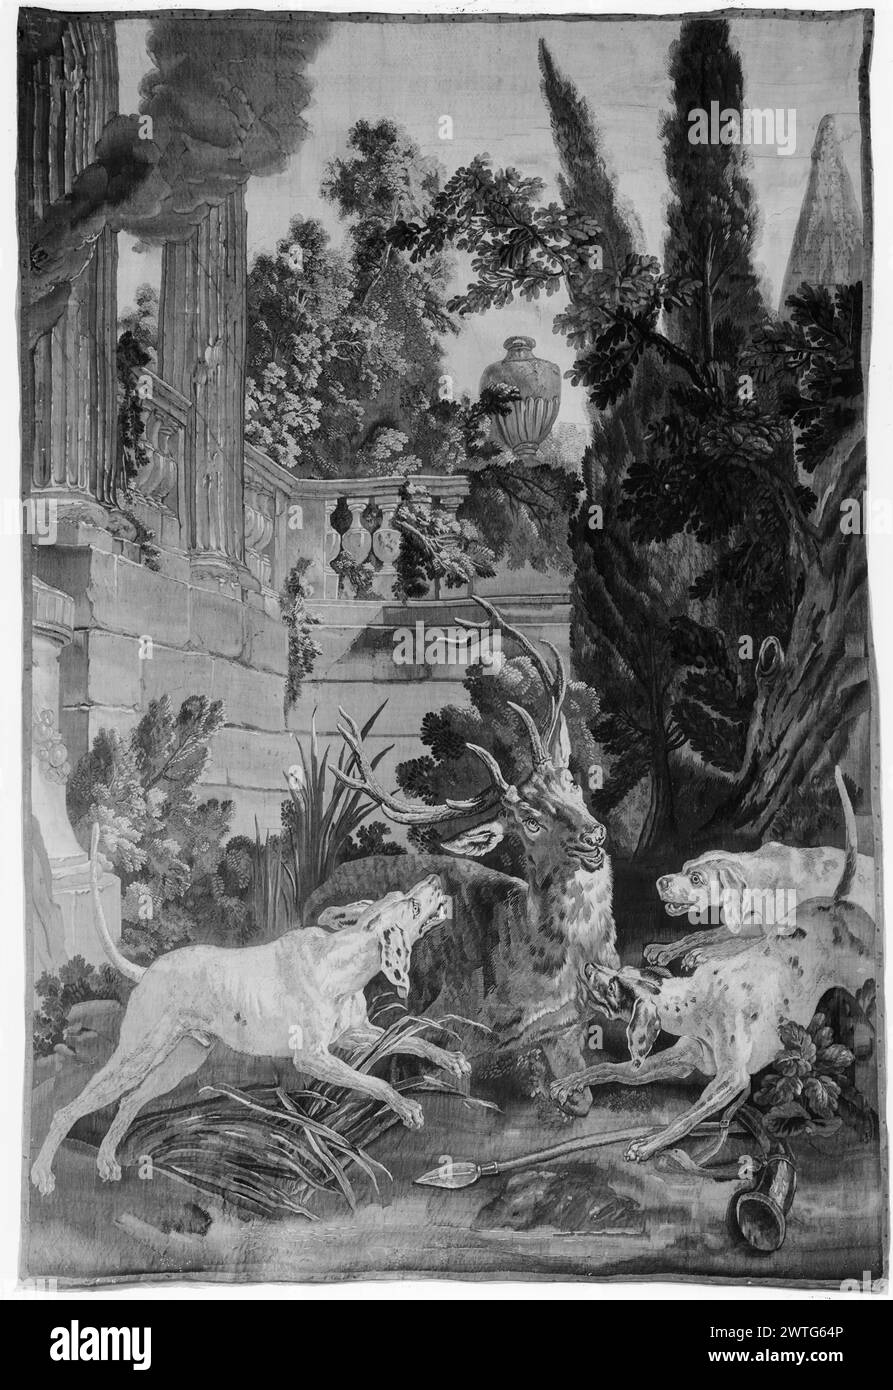 Actaeon changed into stag and devoured by his own dogs. Oudry, Jean-Baptiste (French, 1686-1755) (designed after) [painter] c. 1770 Tapestry Dimensions: H 10'7' x W 7'3' Tapestry Materials/Techniques: unknown Culture: French Weaving Center: Aubusson Ownership History: Arnold Seligmann, Paris (Soustelle). Frederick Housman, New York, 1941 (Soustelle). French & Co. purchased from Parke-Bernet Galleries, Lot 390, (Douglas sale), received 9/26/1941; sold to Anders Jahre 4/17/1964. As punishment for seeing her bathe, Diana changes Actaeon, the hunter, into stag, which is devoured by his own dogs; a Stock Photo